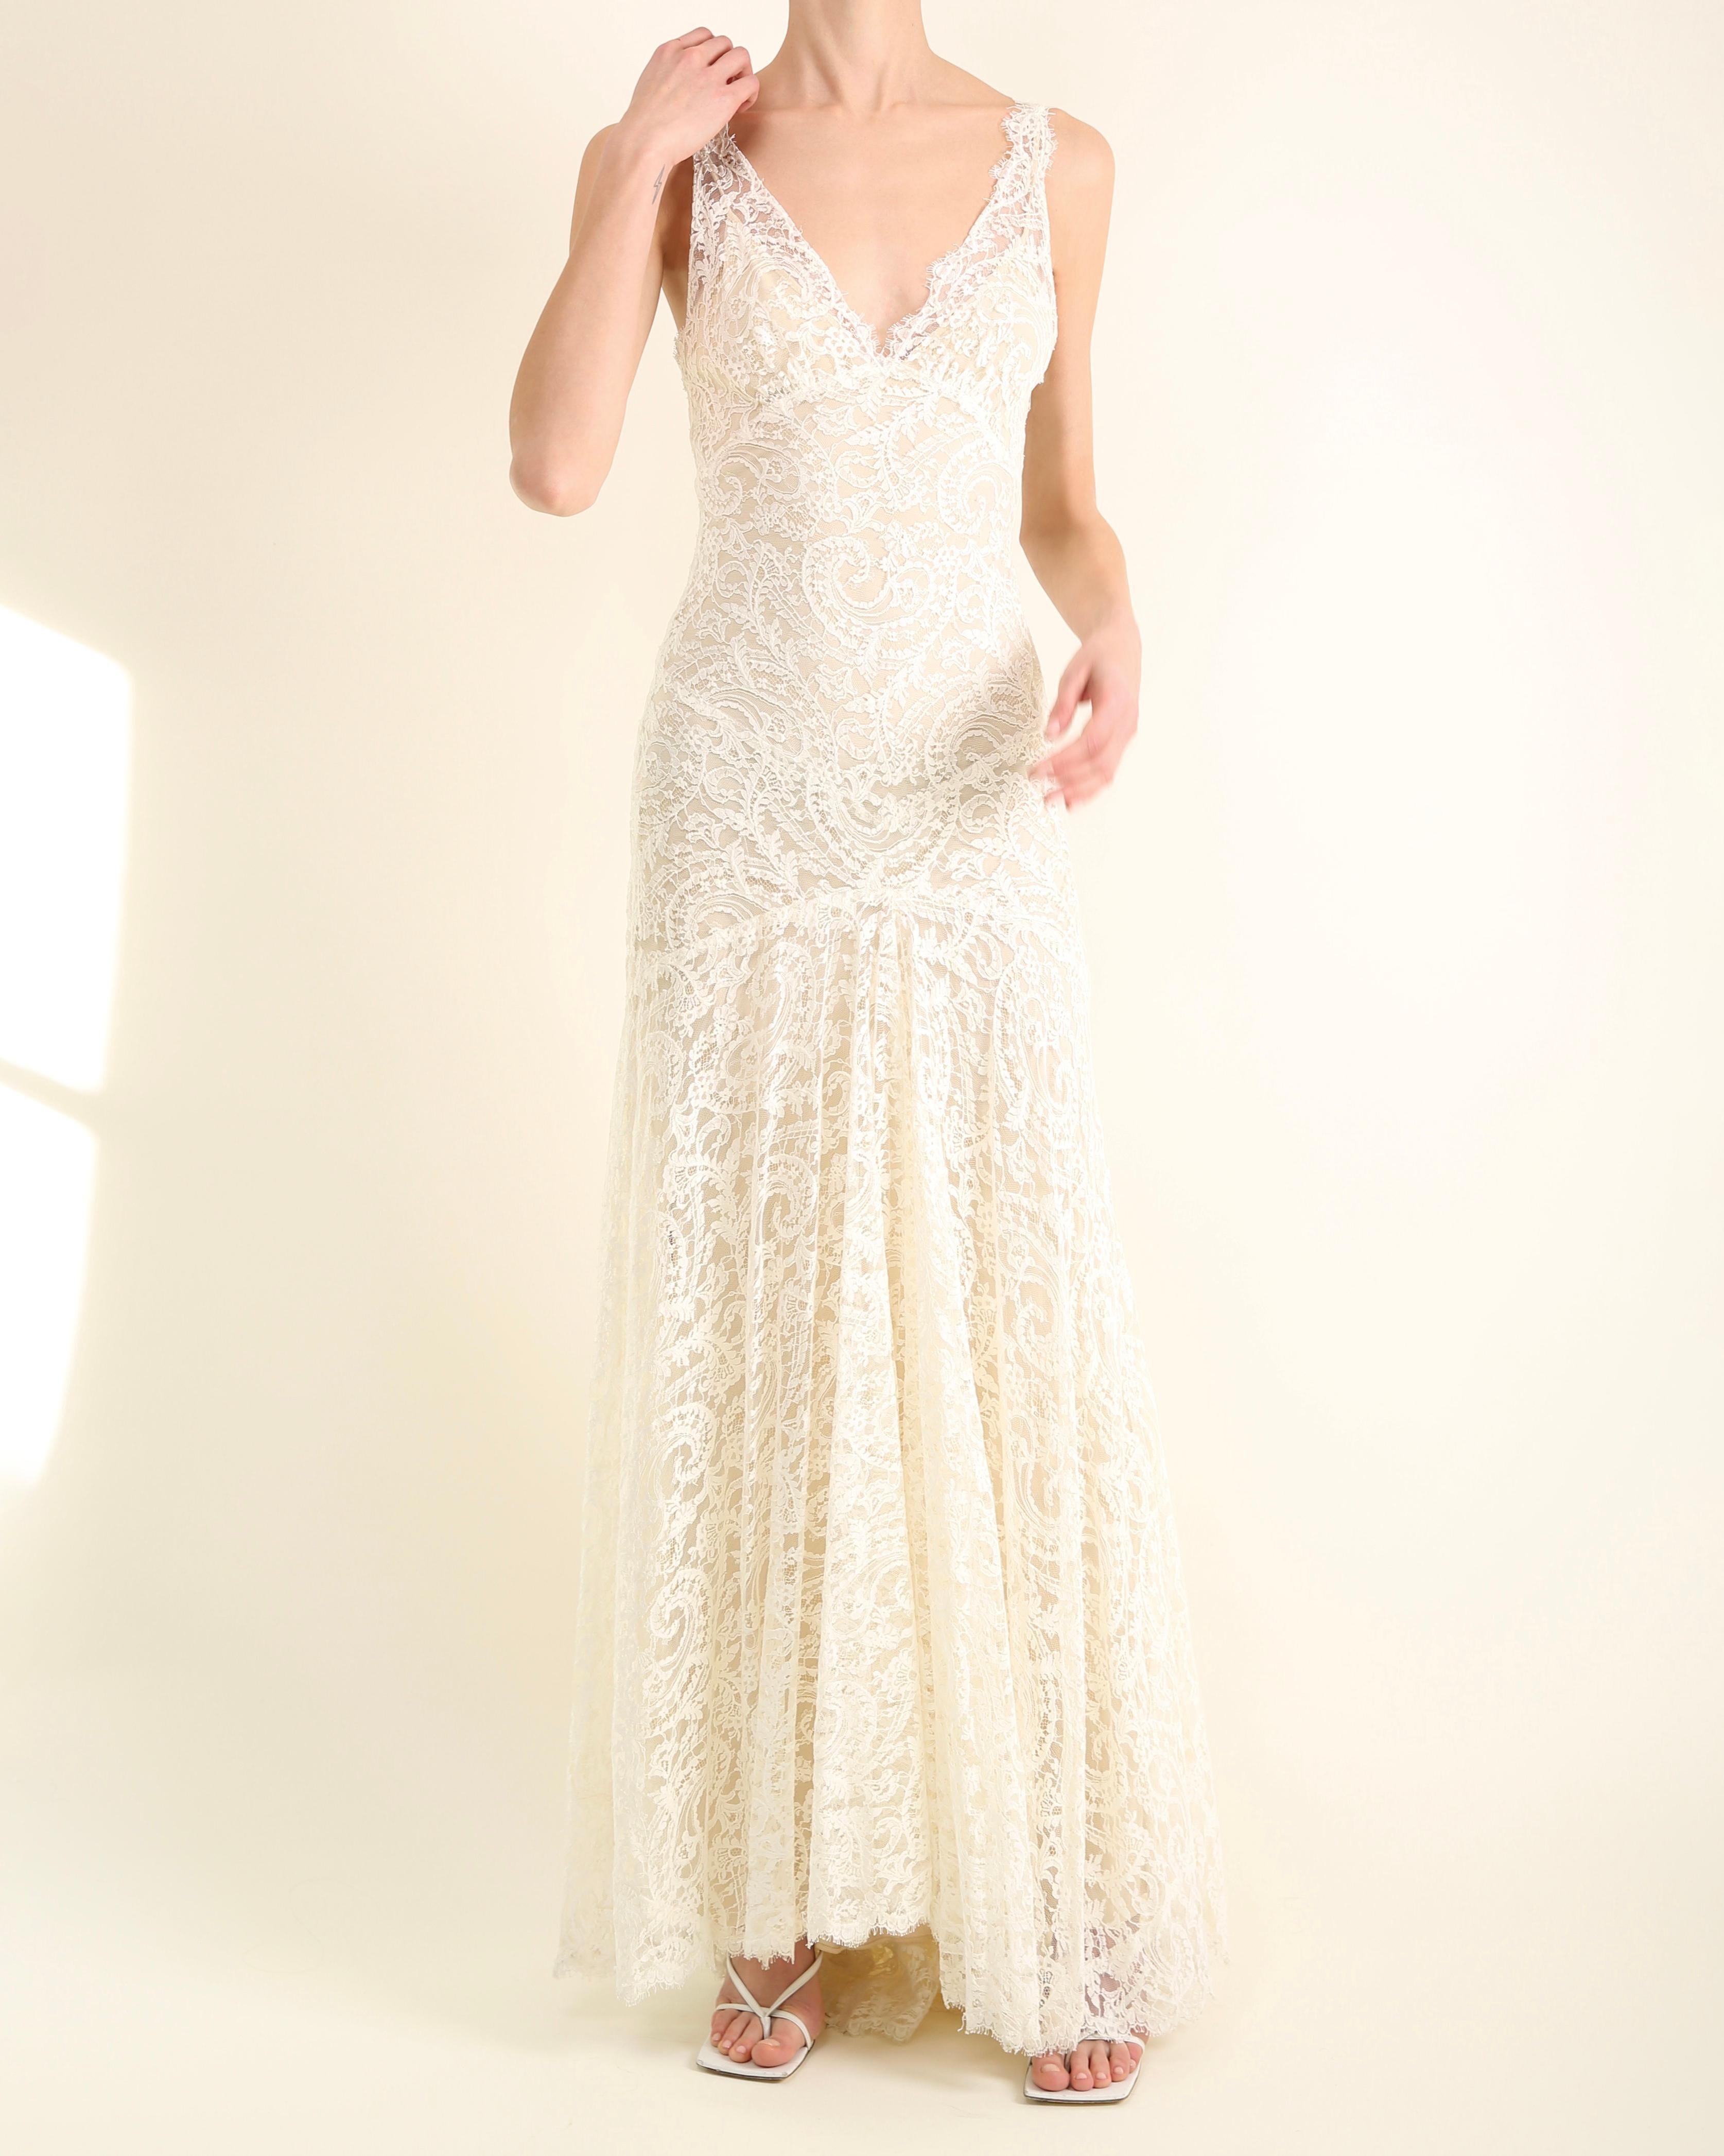 Monique Lhuillier ivory lace plunging backless wedding gown with train dress  6